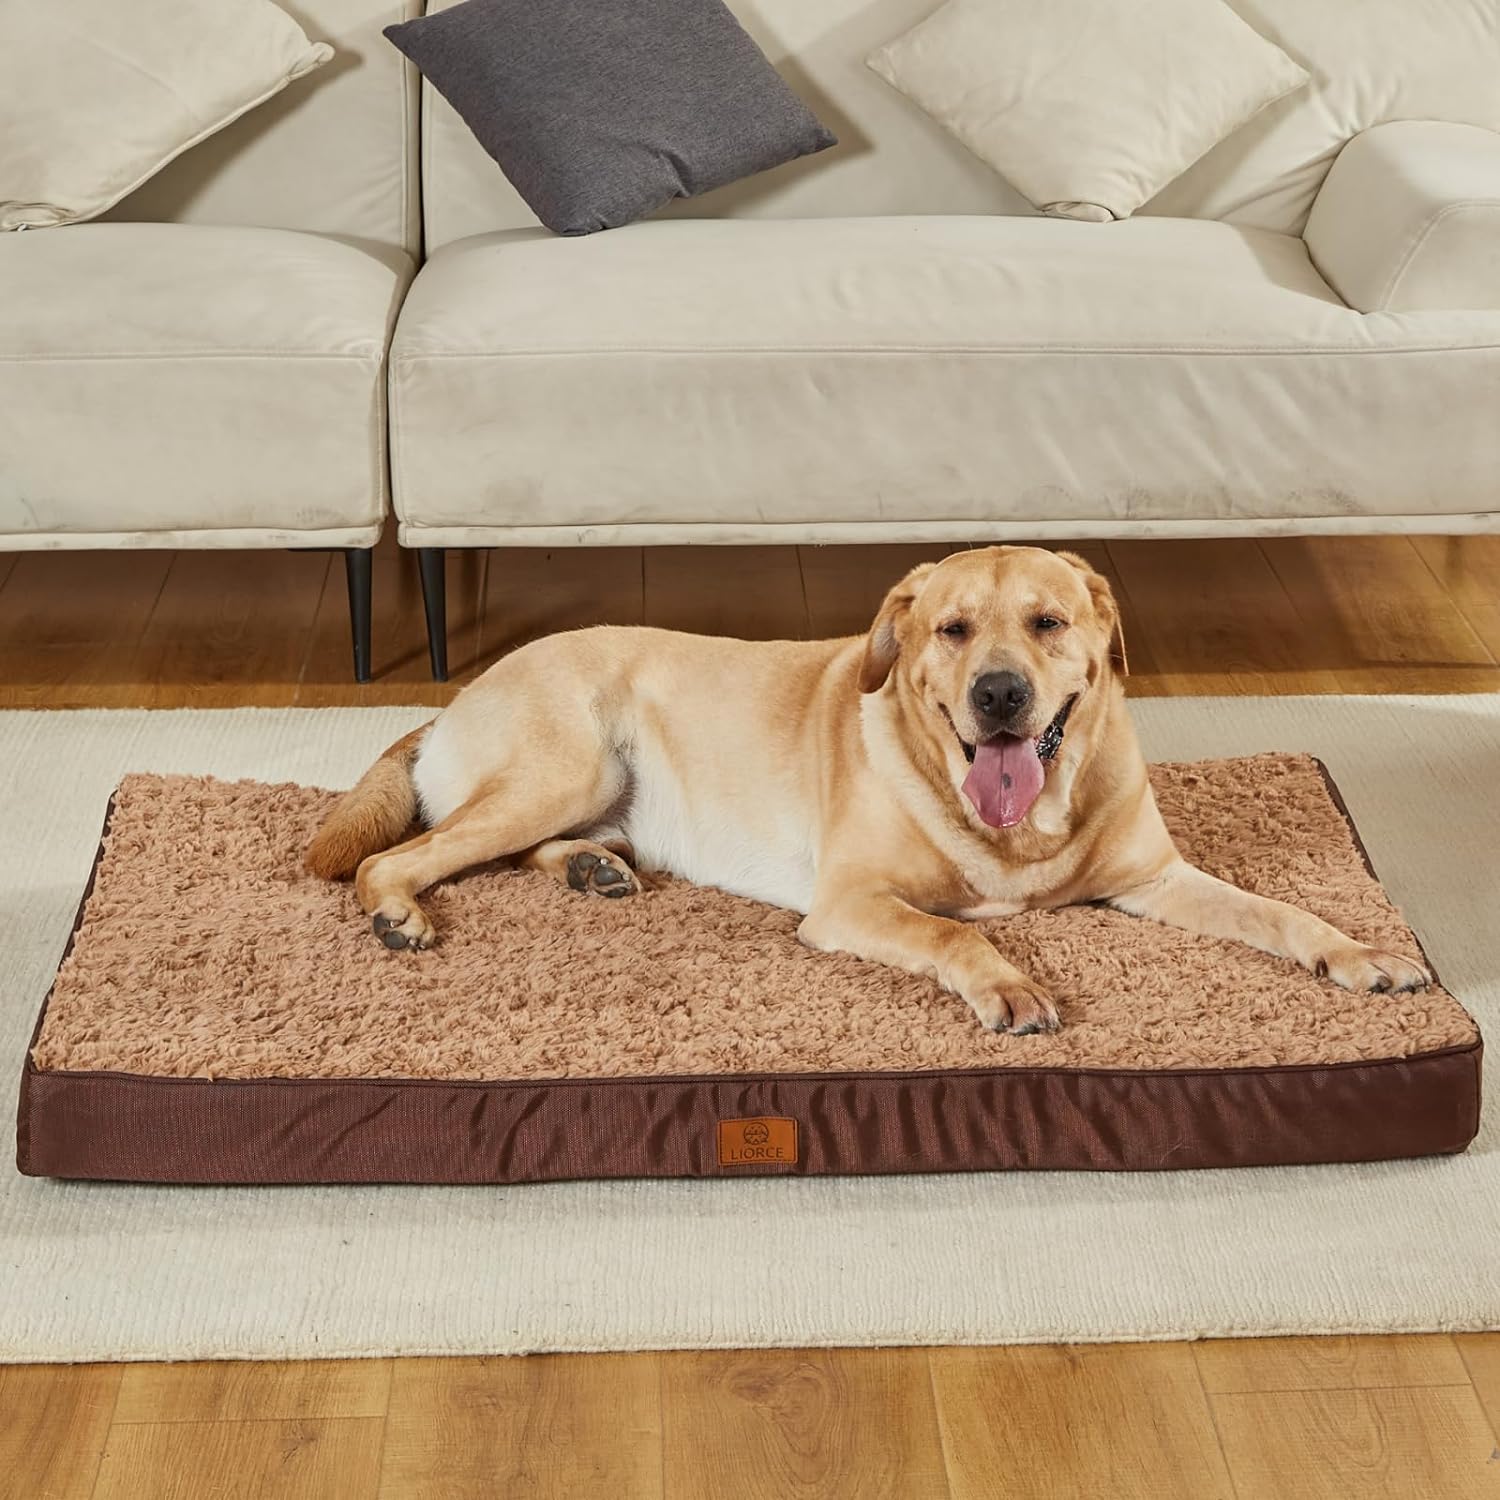 LIORCE Jumbo Dog Bed for Extra Large Dogs - XXXL Orthopedic Dog Beds with Removable Washable Cover, Cooling Egg Foam Pet Bed Mat with Waterproof Liner, Non-Slip Bottom, Brown